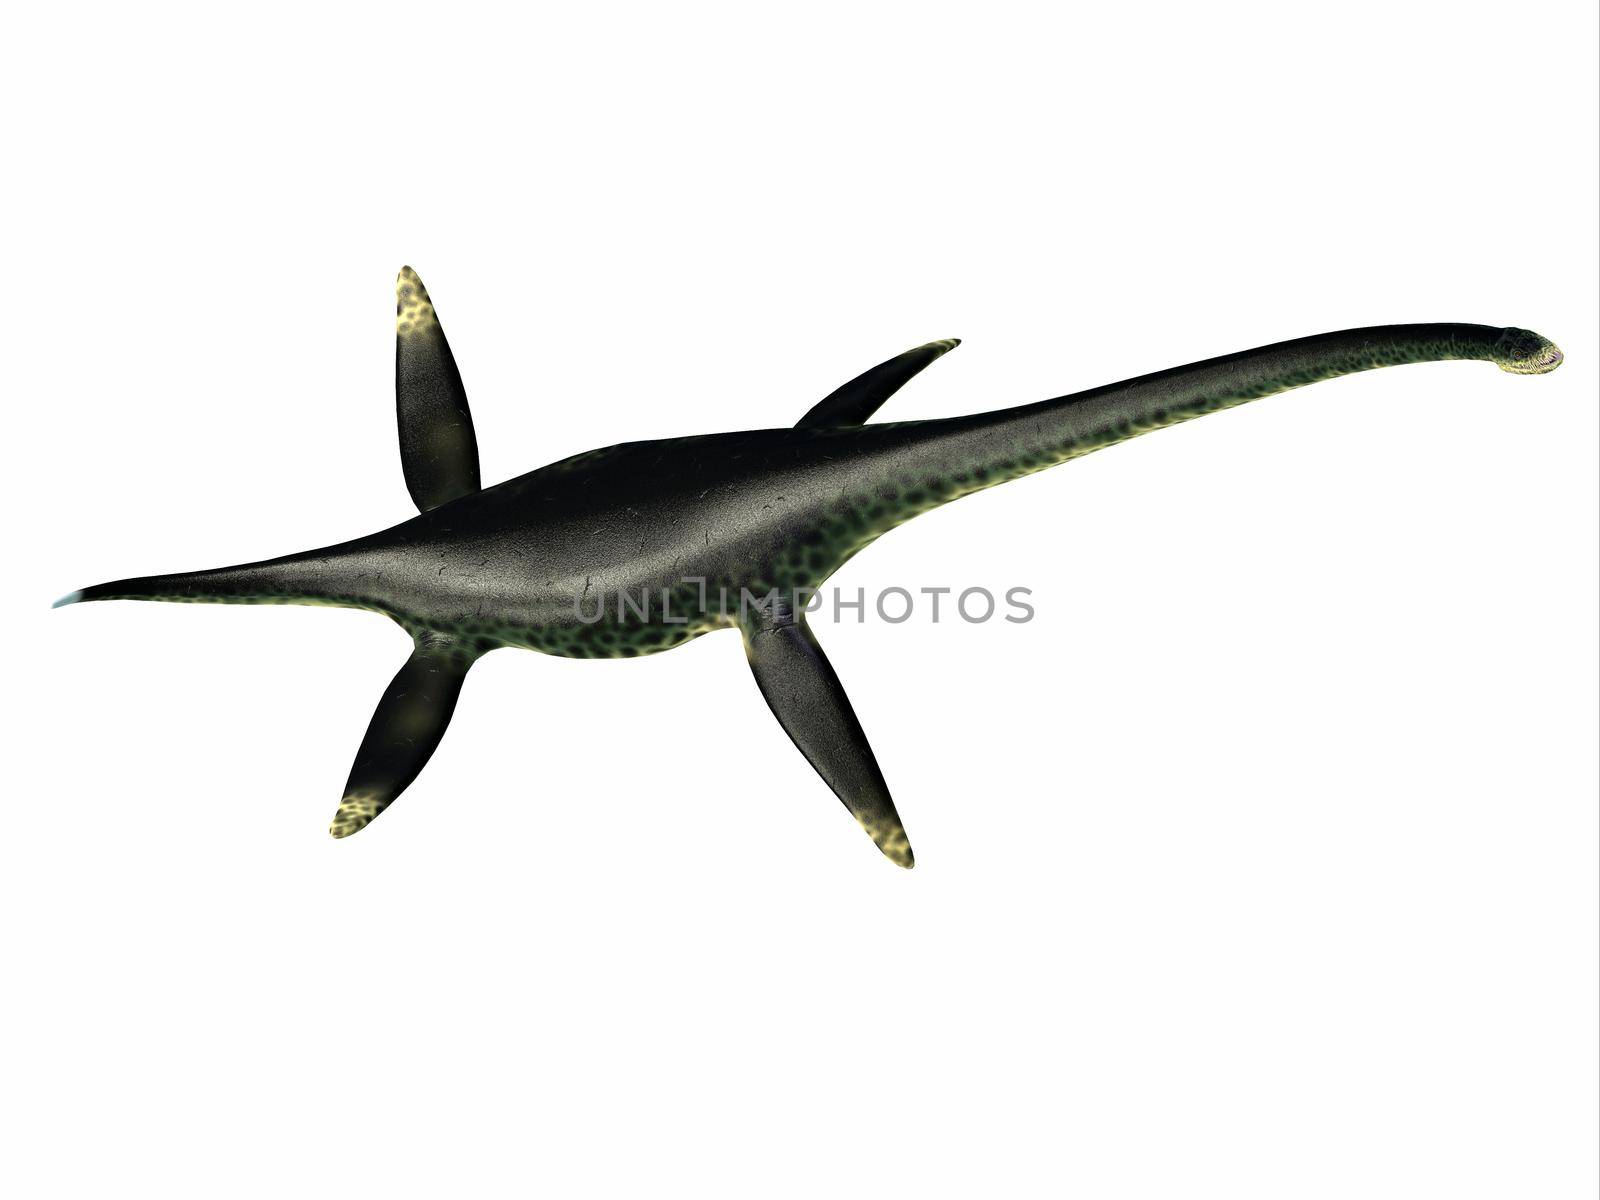 Styxosaurus was a predatory marine Plesiosaur reptile that lived in the seas of North America during the Cretaceous Period.